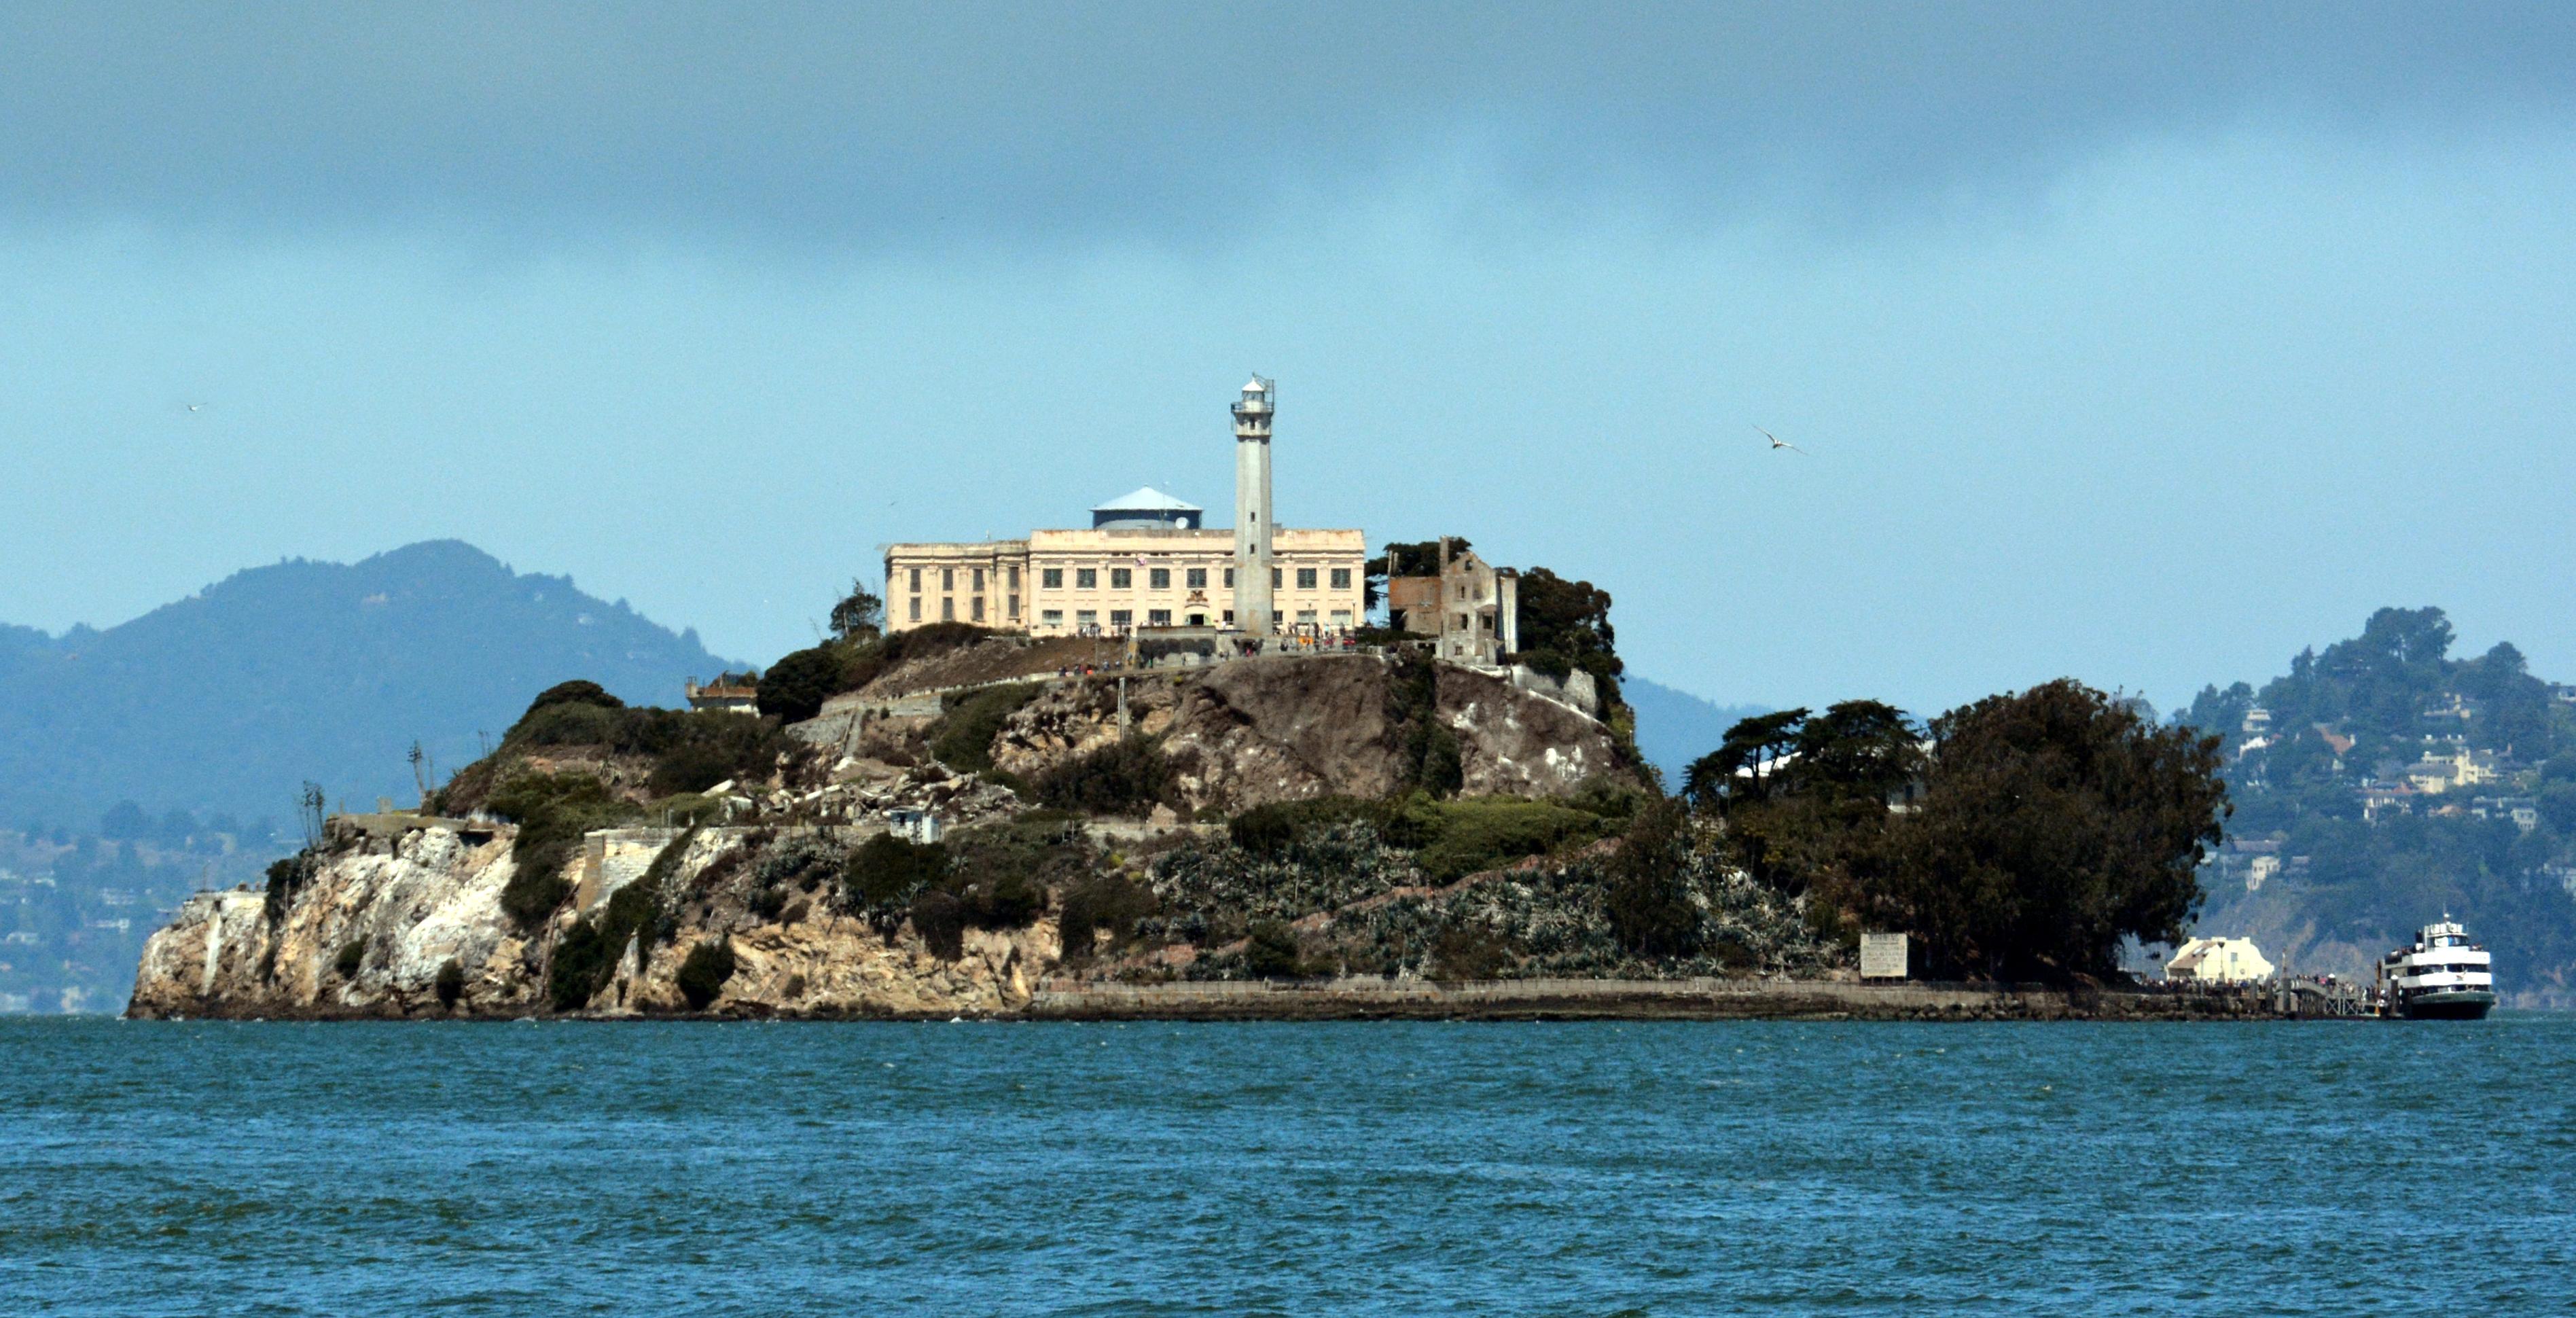 Cover image of this place Alcatraz Island